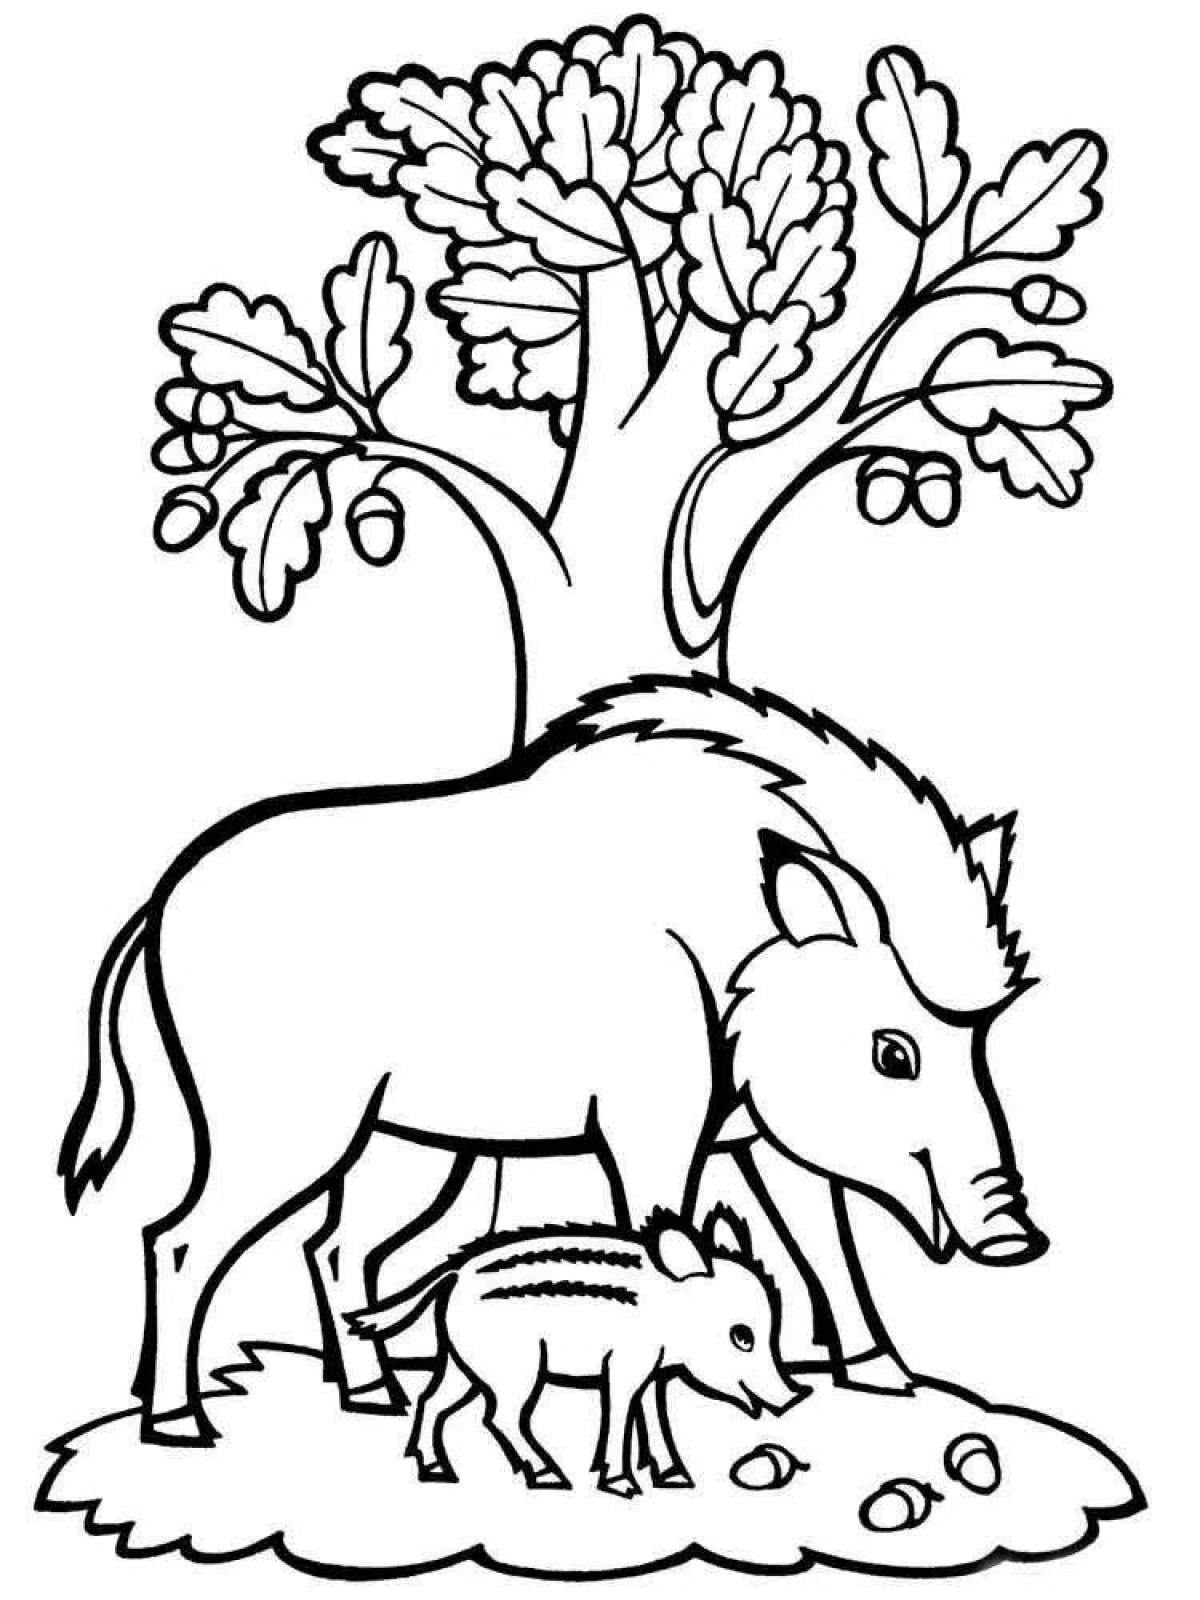 Comic wild animal and baby coloring page